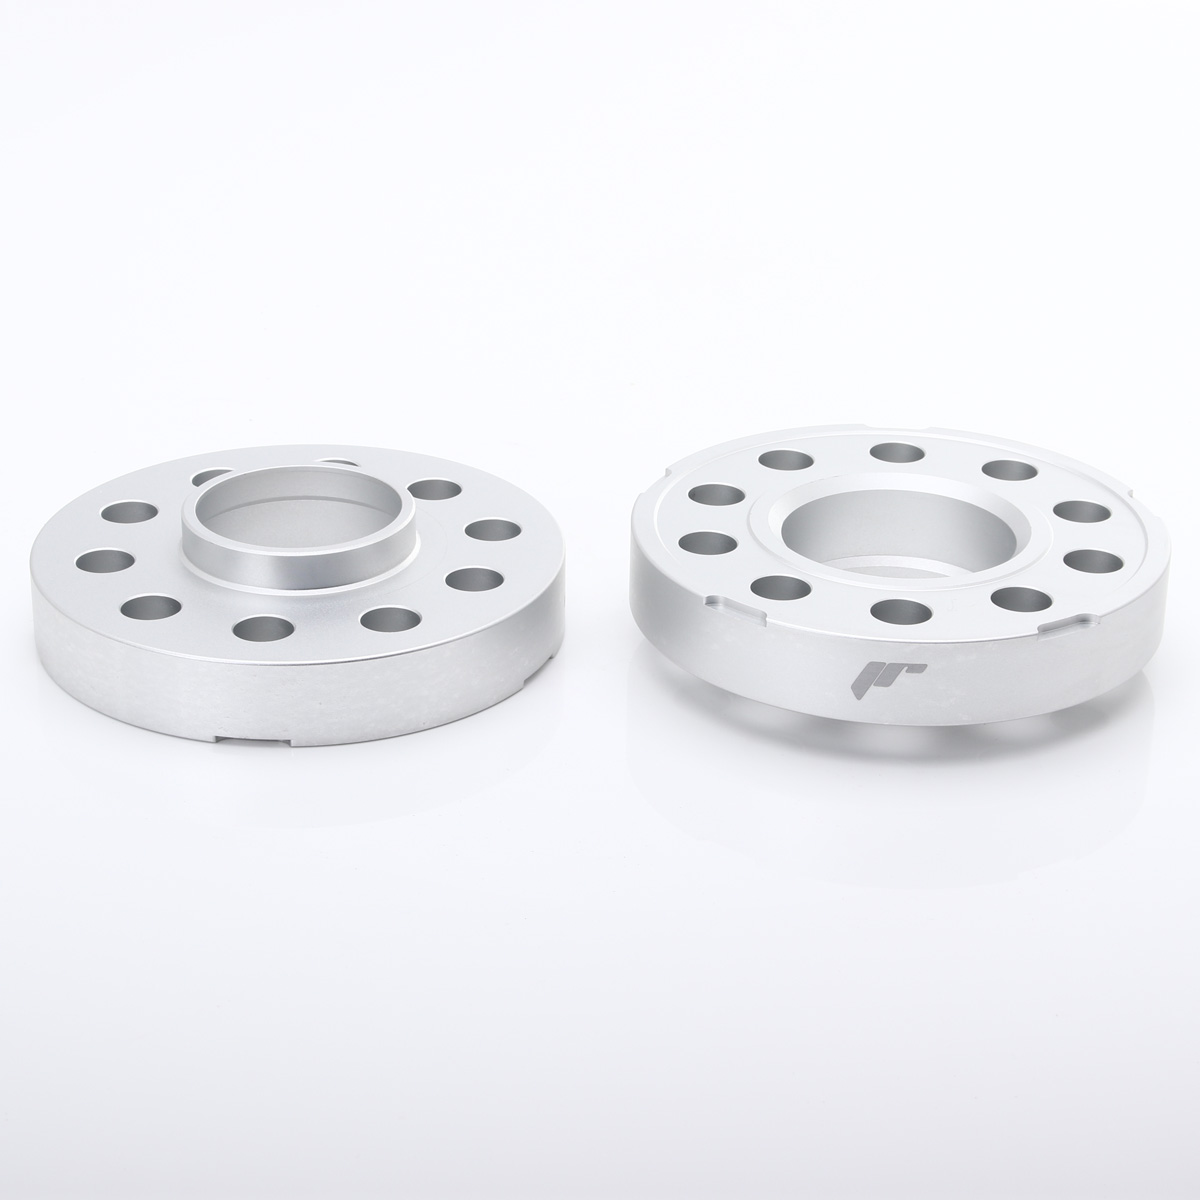 JRWS2 Spacers 20mm 4x108 65,1 65,1 Silver